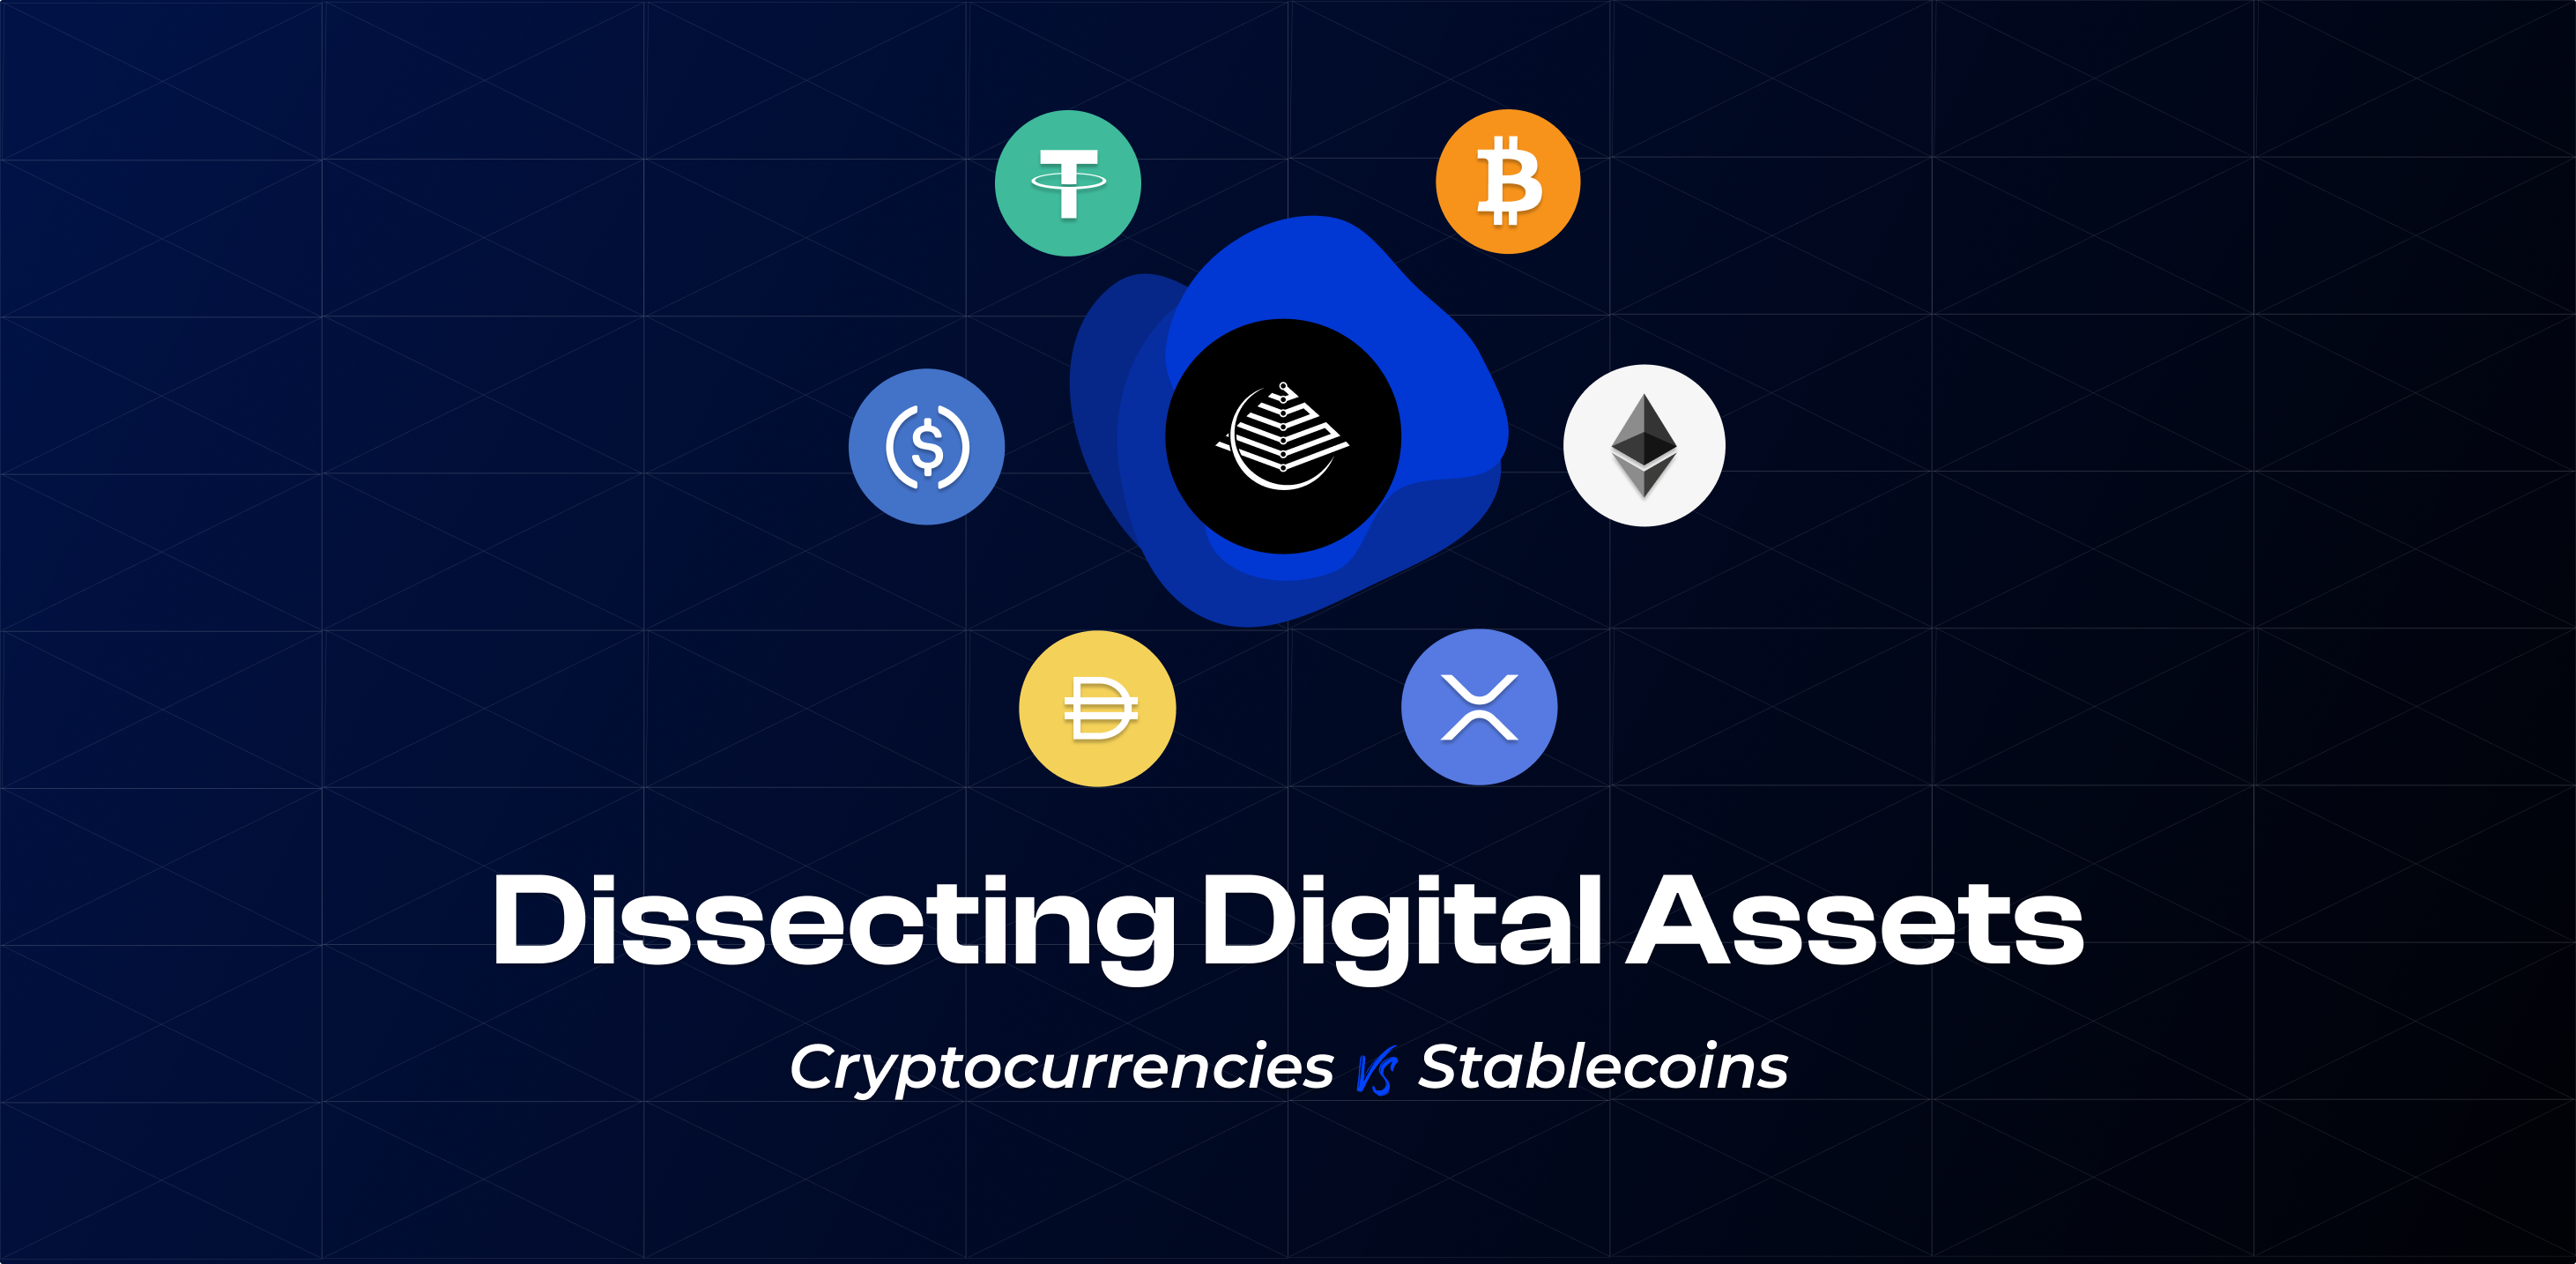 Dissecting Digital Assets: Cryptocurrencies vs Stablecoins